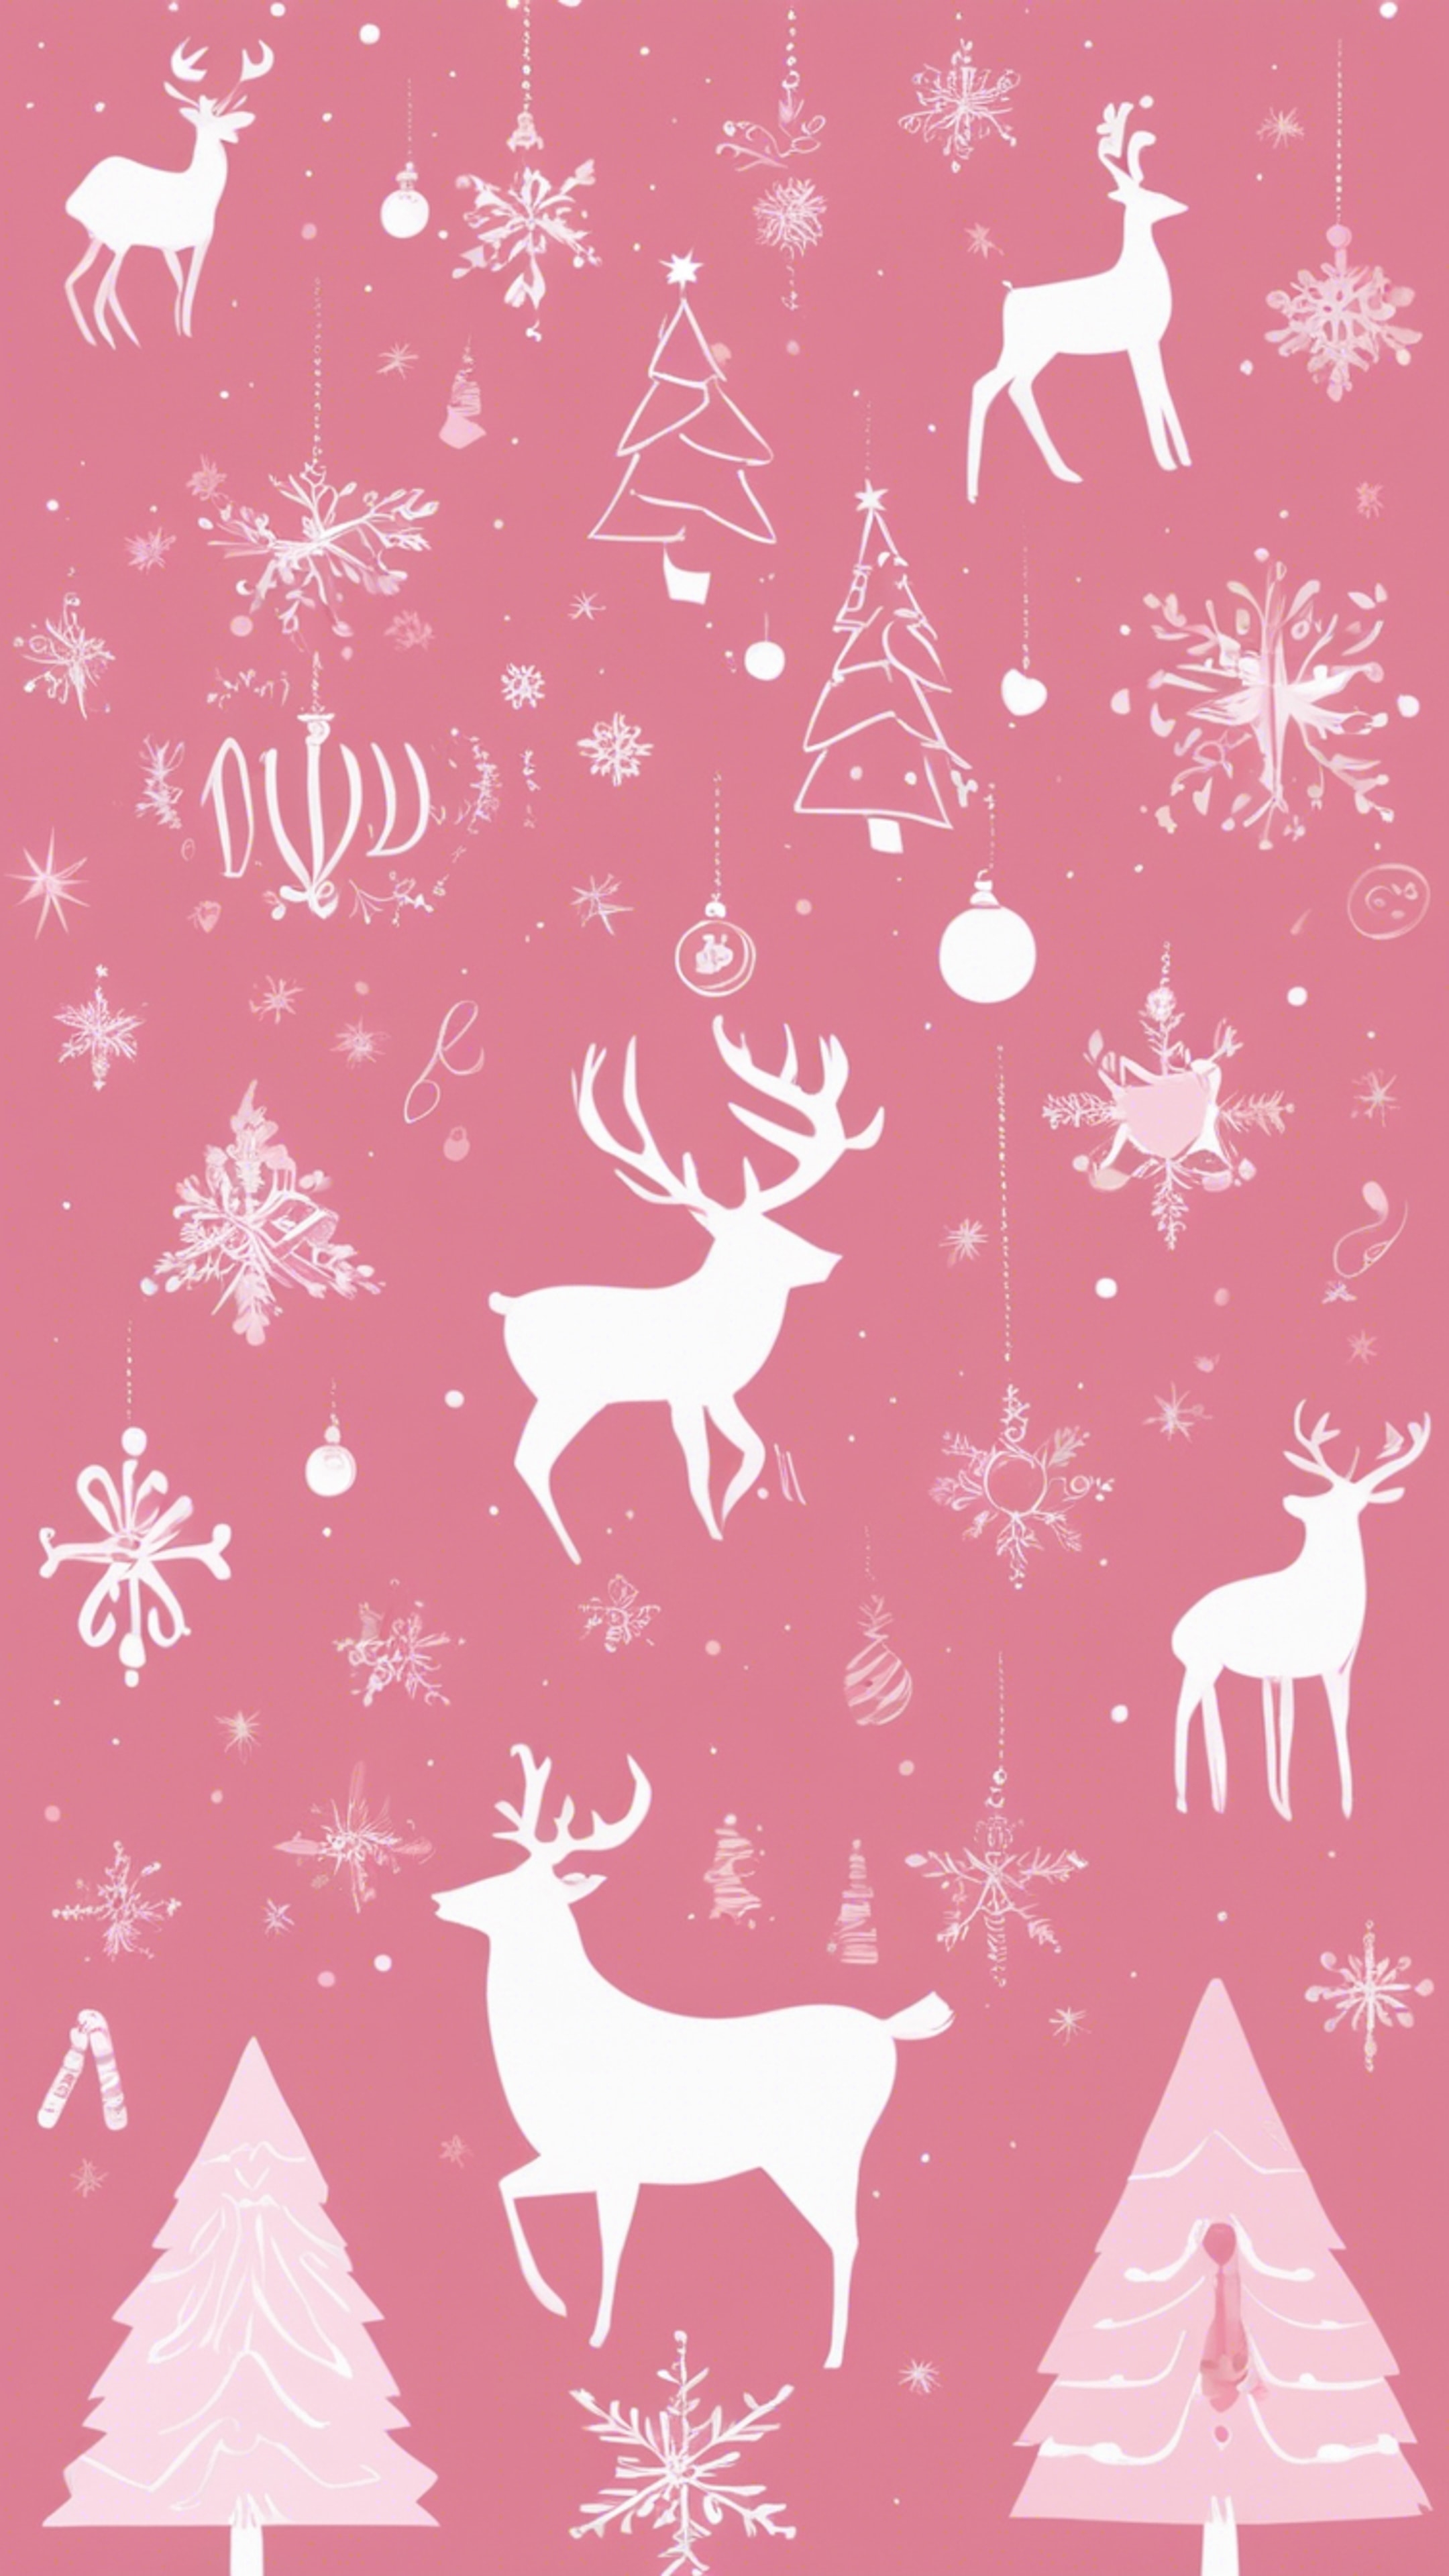 A minimally designed Christmas card with elegant pink illustrations of Christmas icons. Tapeta[9459a801713f4624aabe]